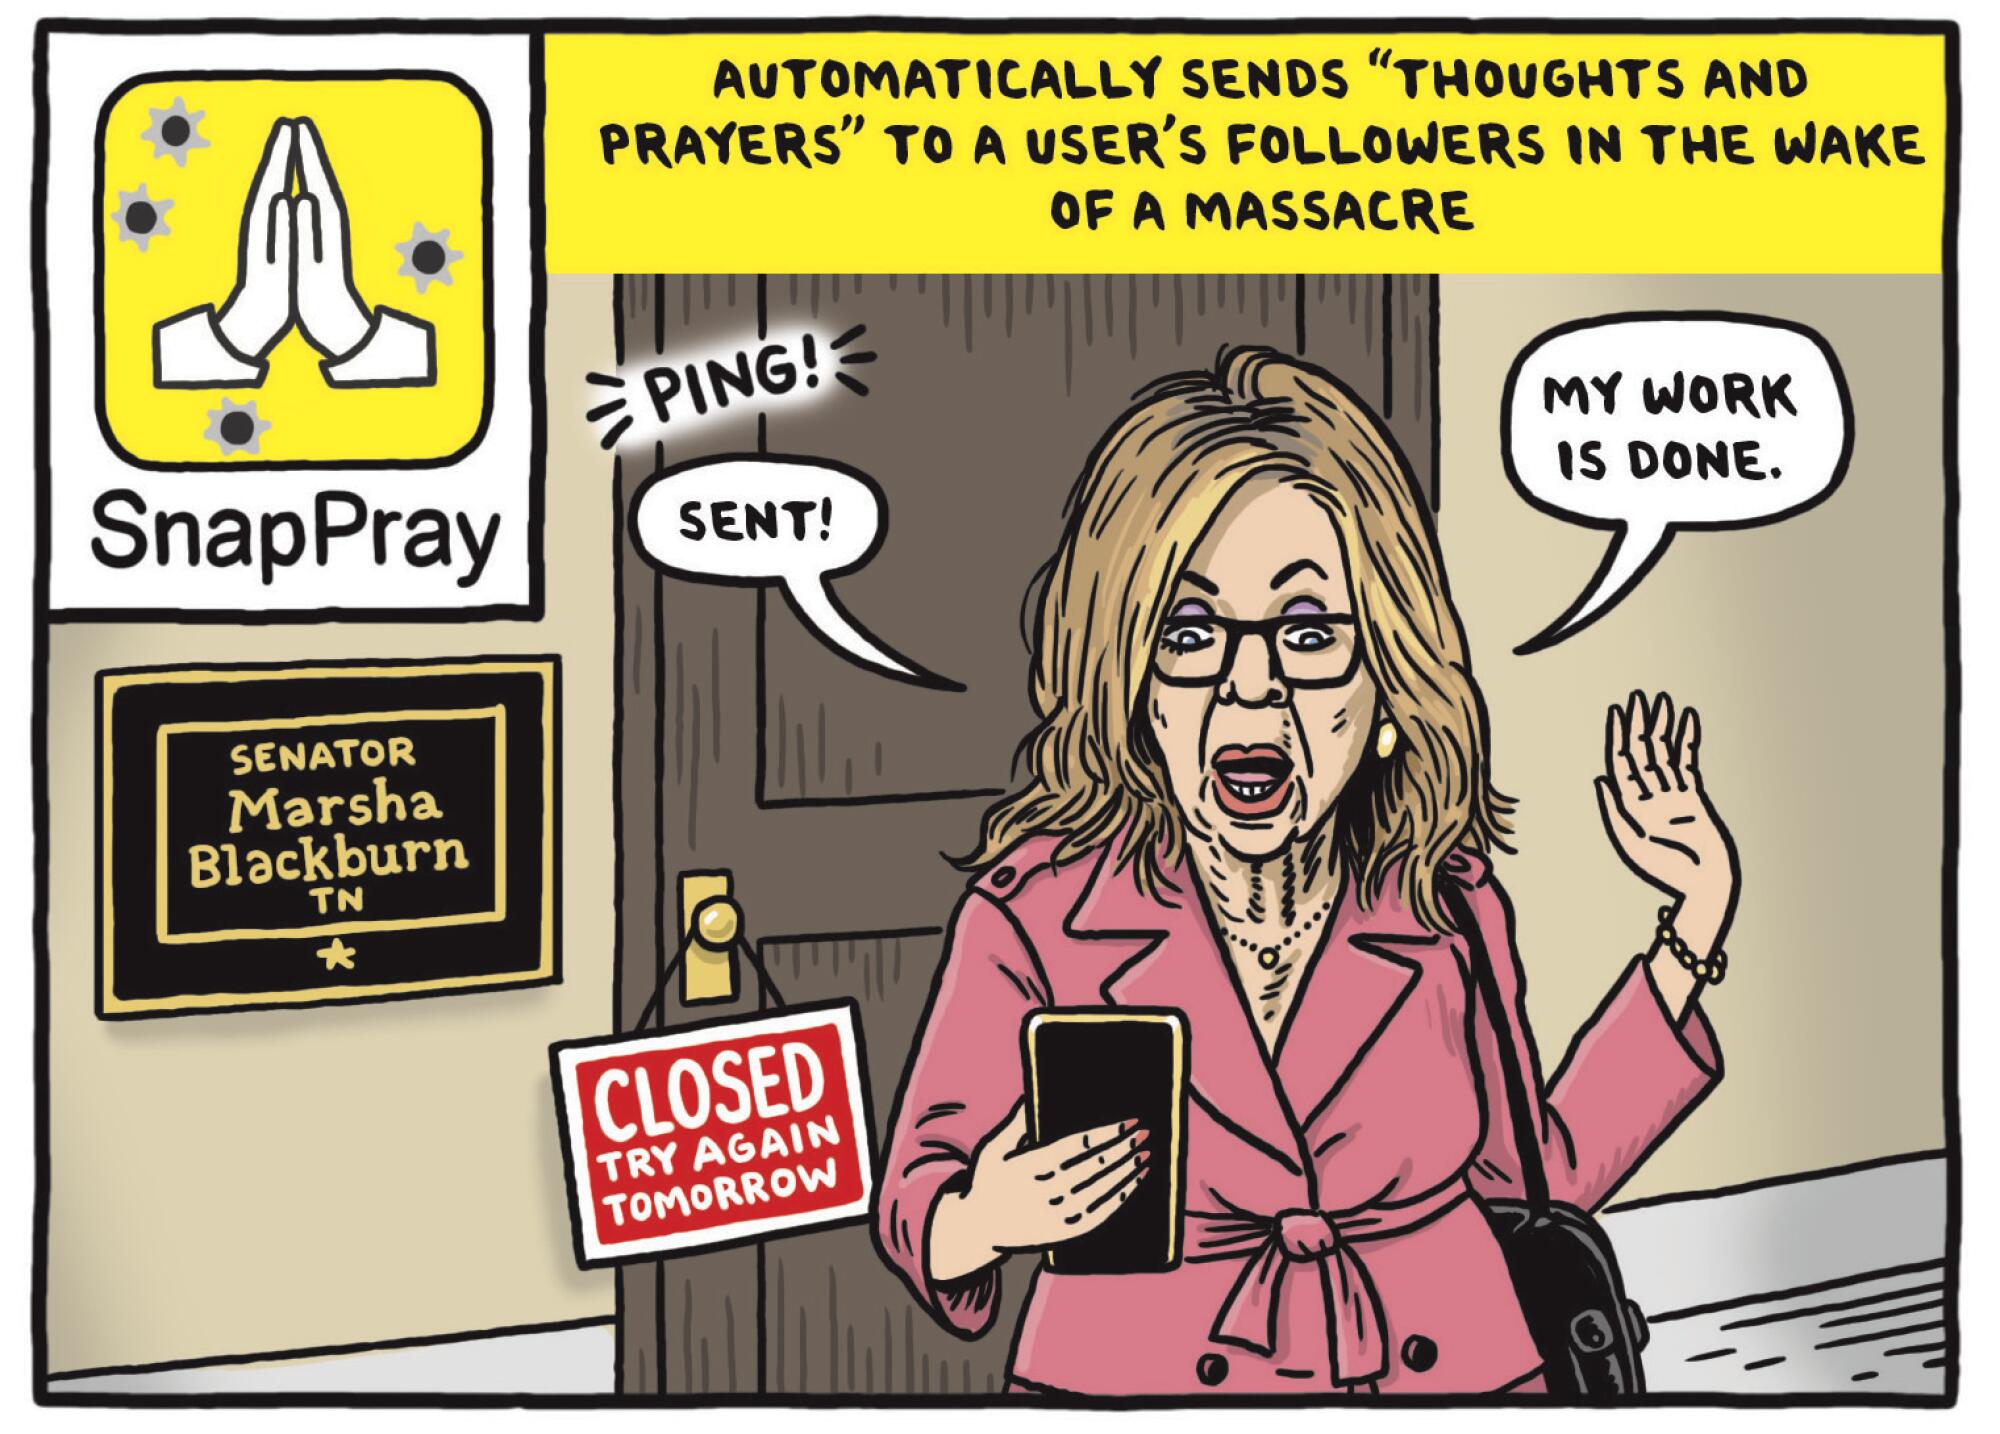 SnapPray: Automatically sends "thoughts and prayers" to a user's followers in the wake of a massacre